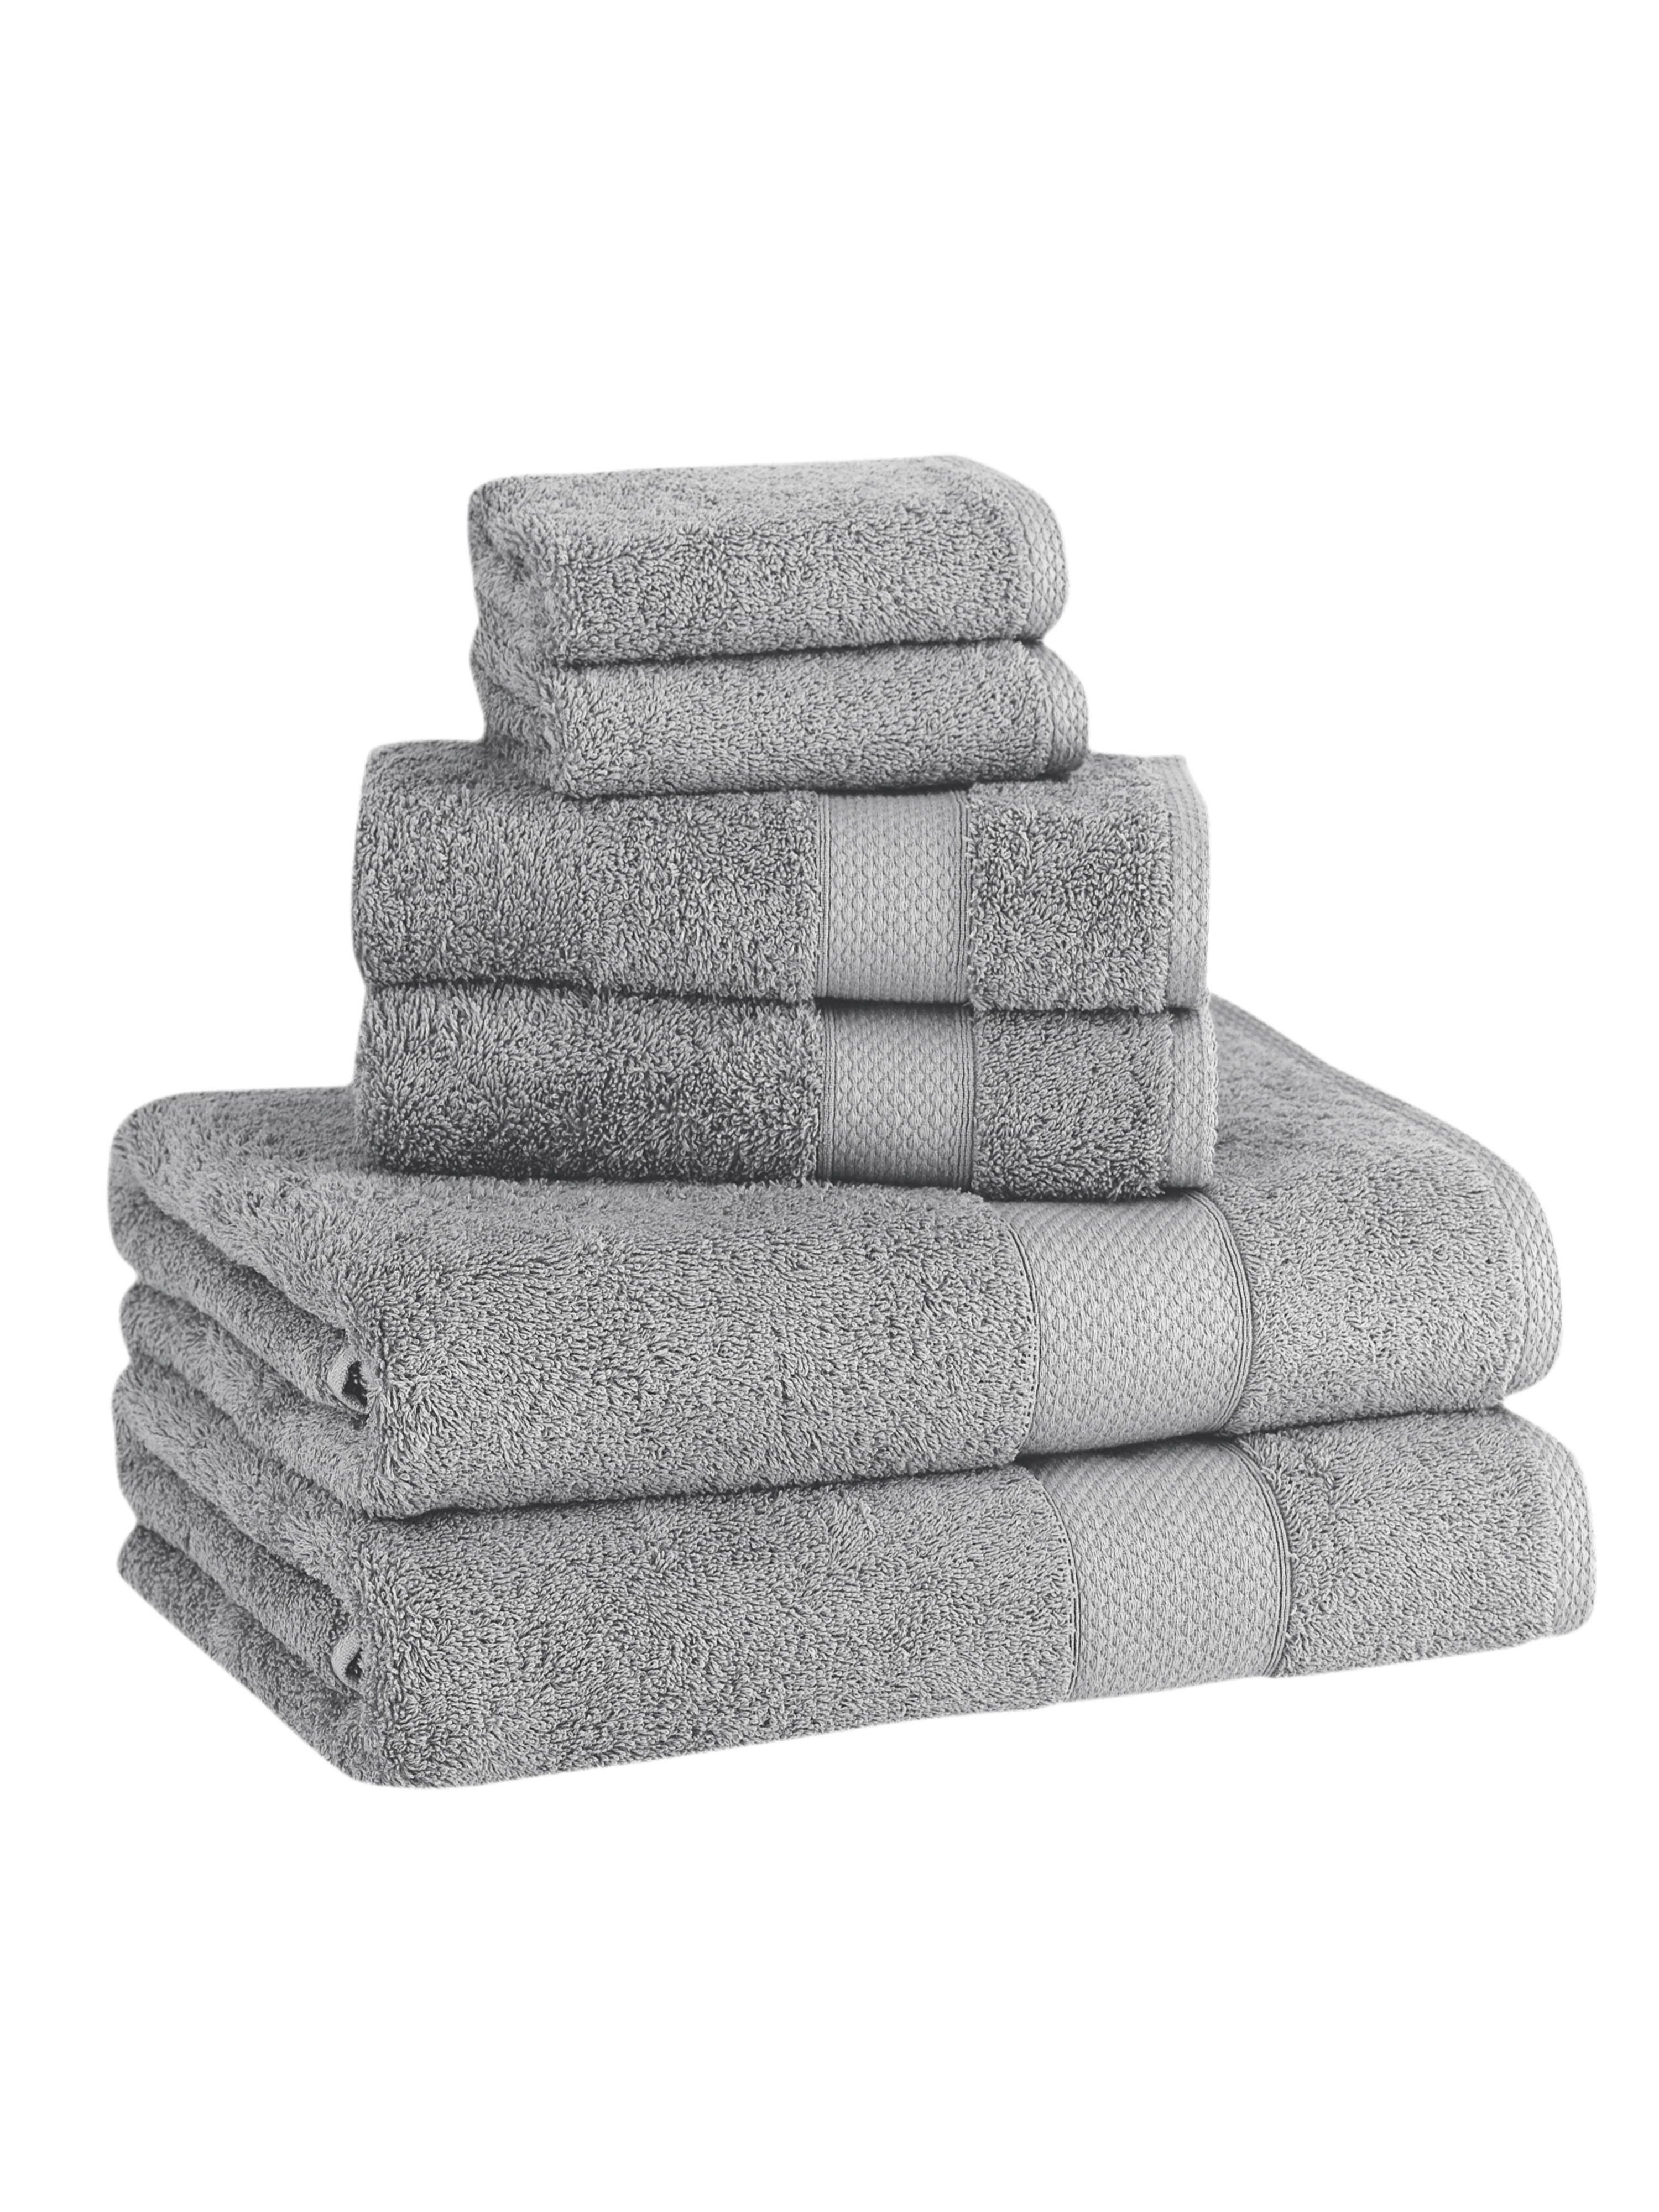 Classic Turkish Towels Luxury Madison Turkish Towels Set Of 6-piece Plush And Thick In Grey